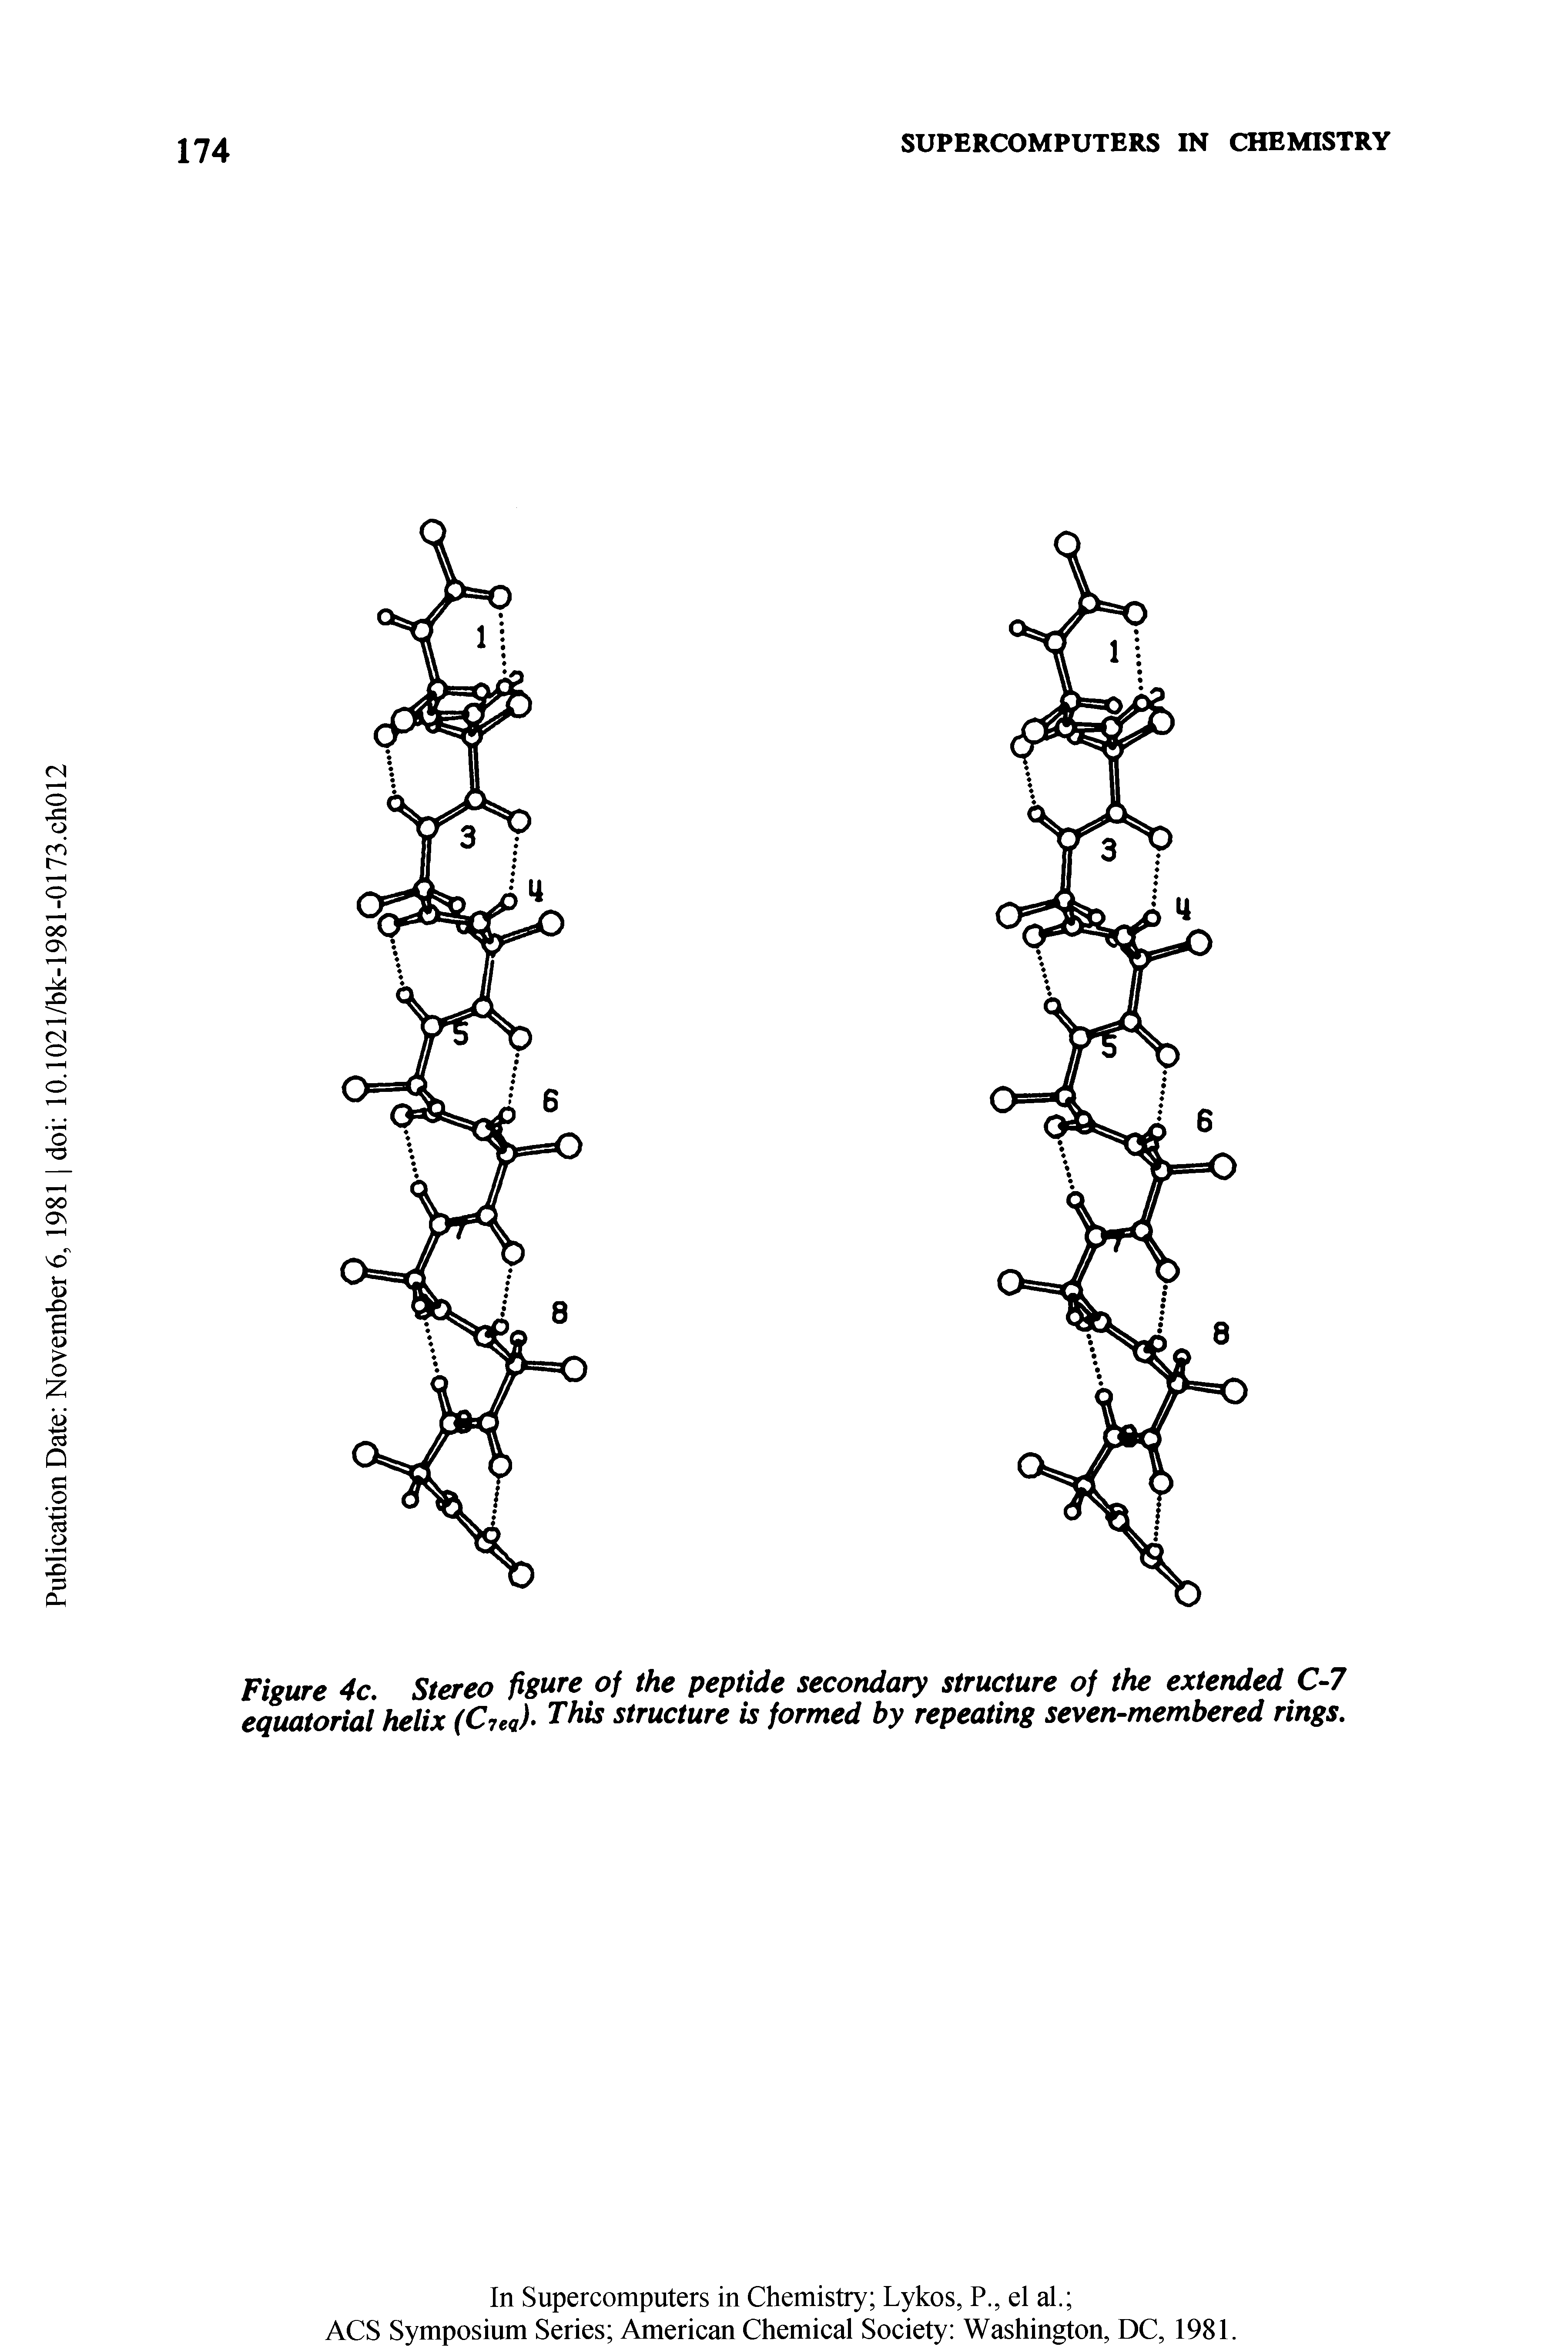 Figure 4c. Stereo figure of the peptide secondary structure of the extended C-7 equatorial helix (C7eq)- This structure is formed by repeating seven-membered rings.